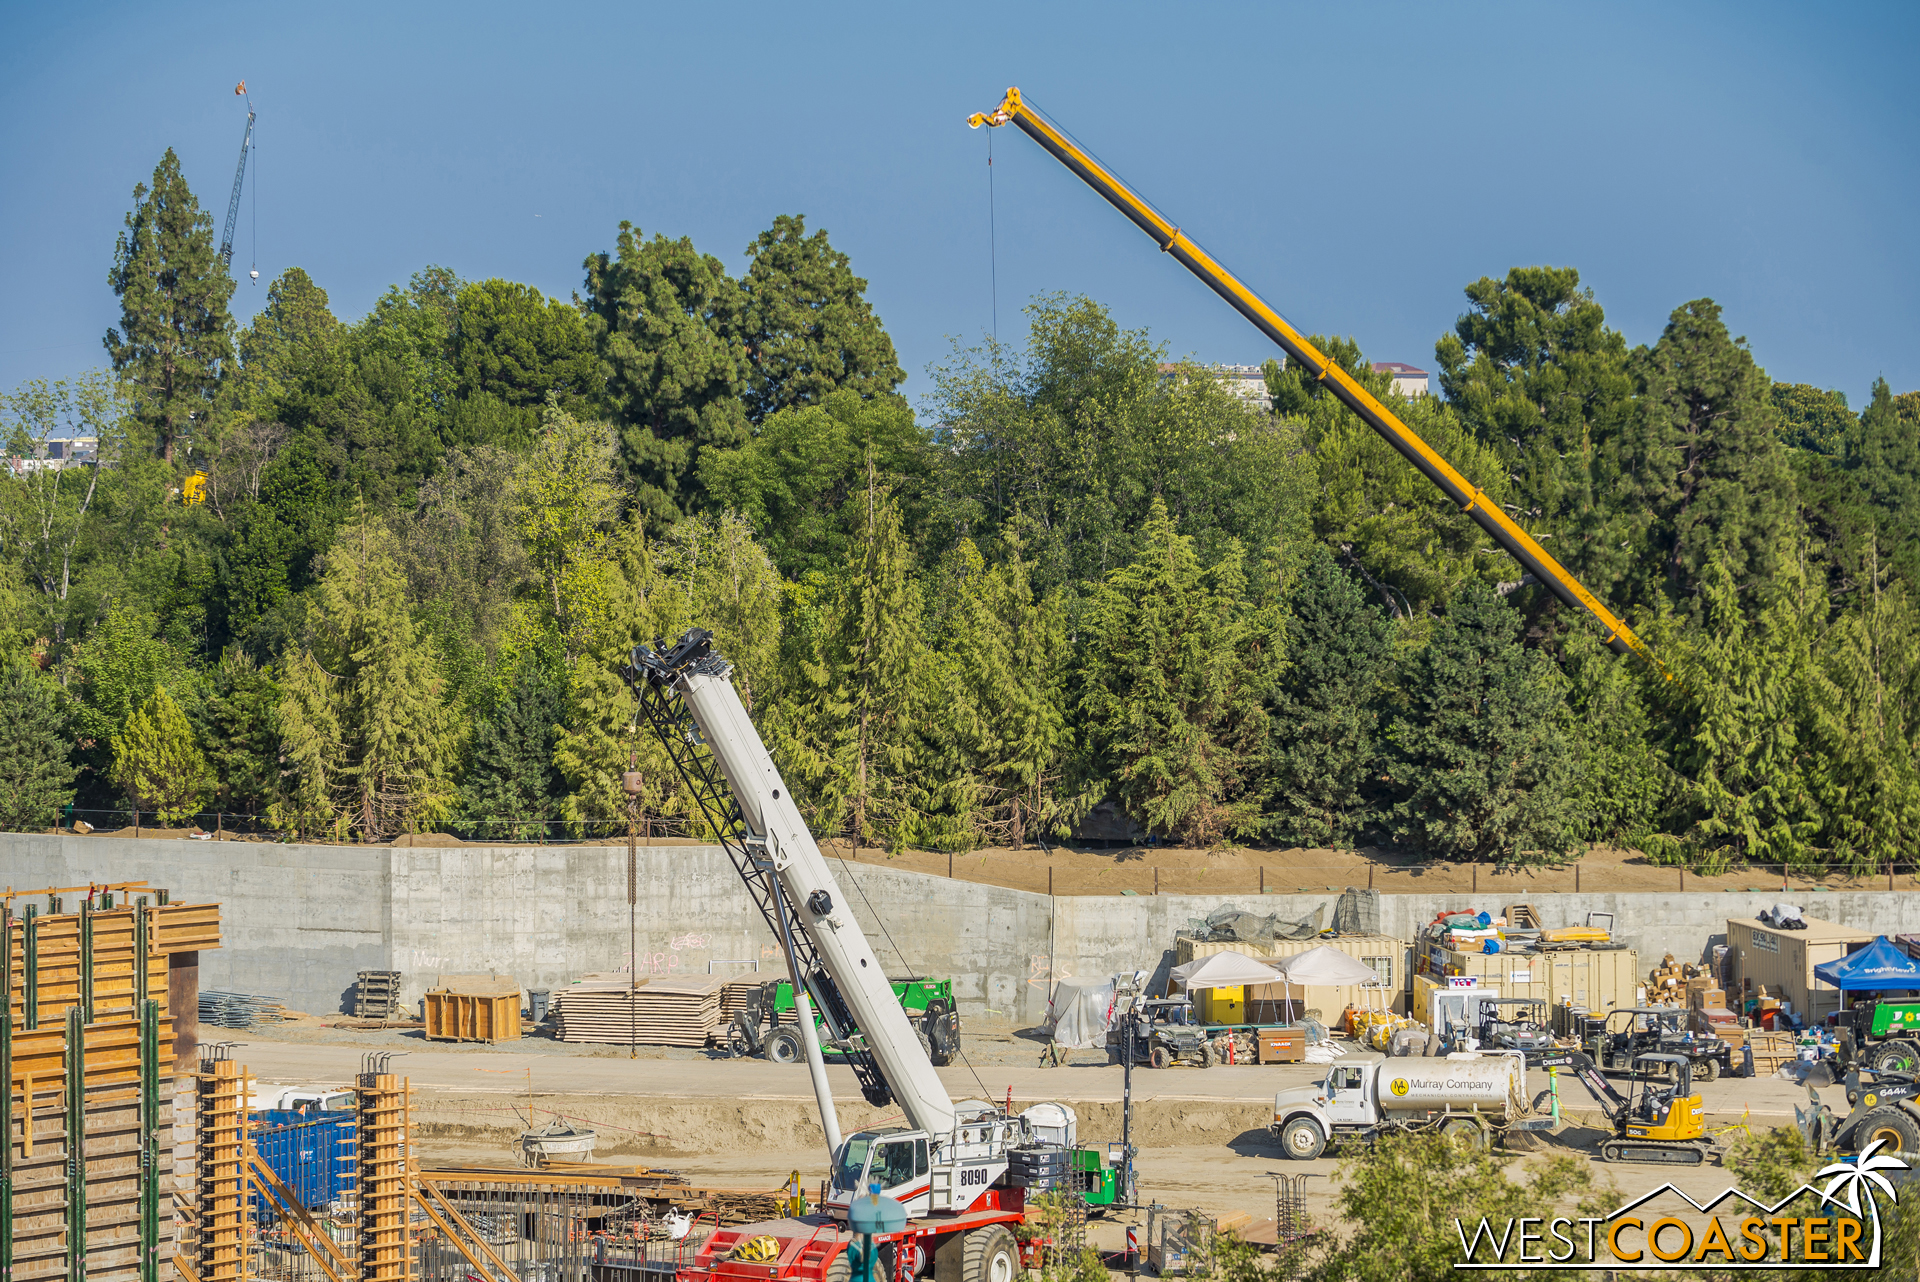  Another crane along the Critter Country side of the Rivers of America has appeared. 